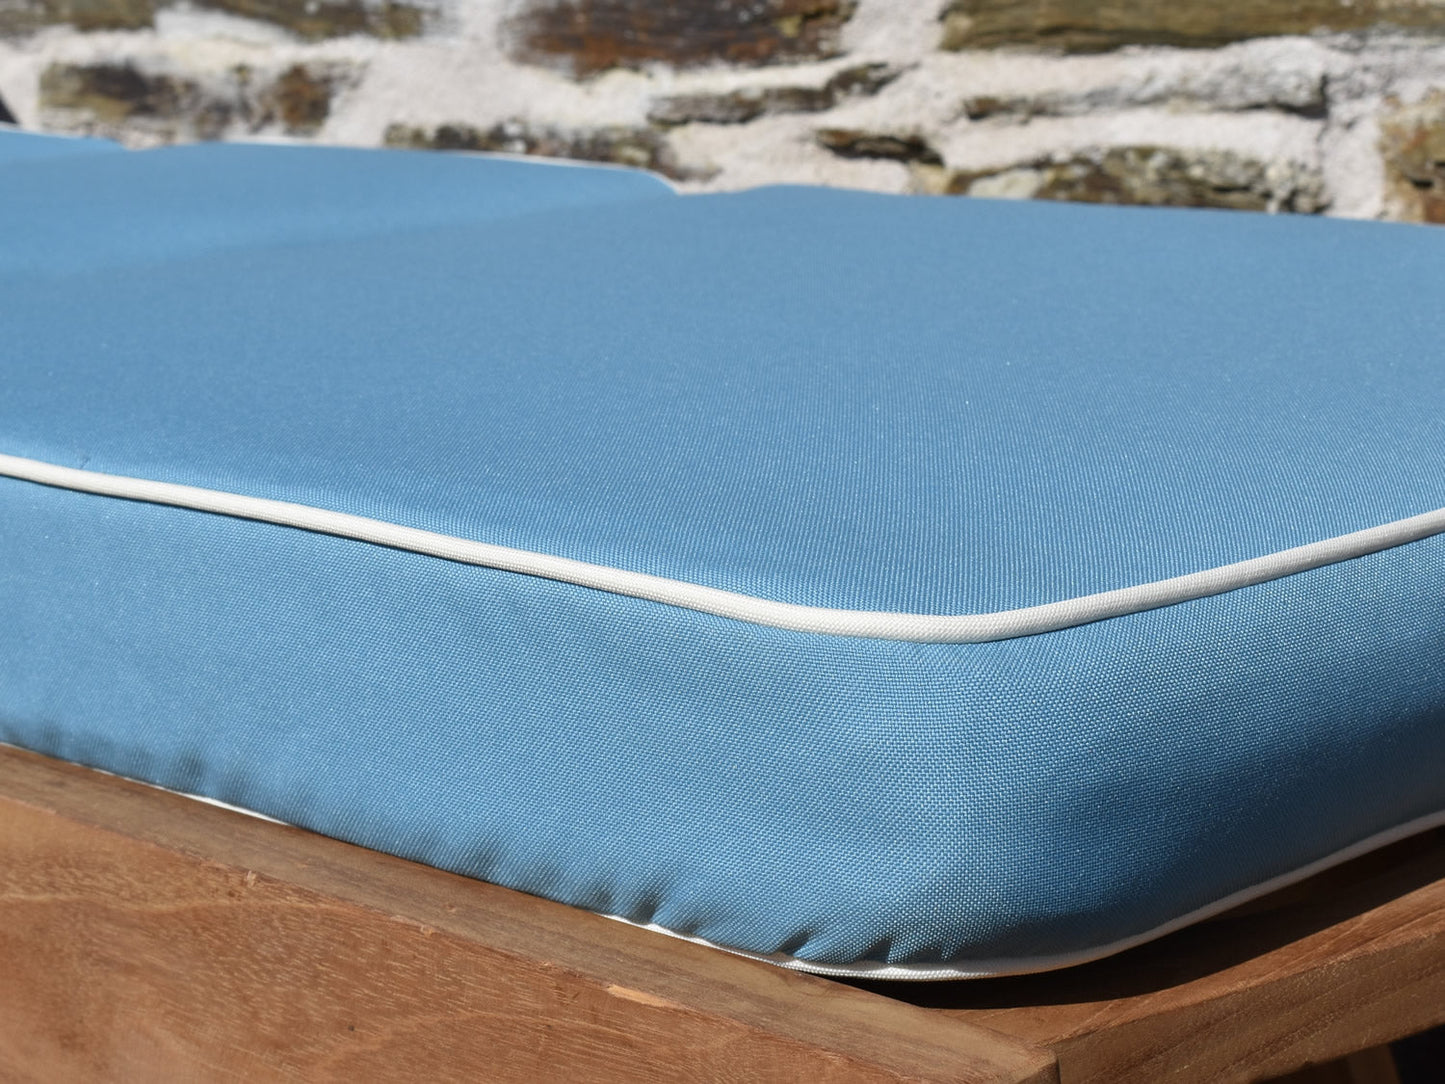 close up detail of luxury light blue sunlounger cushion with contrast white piping